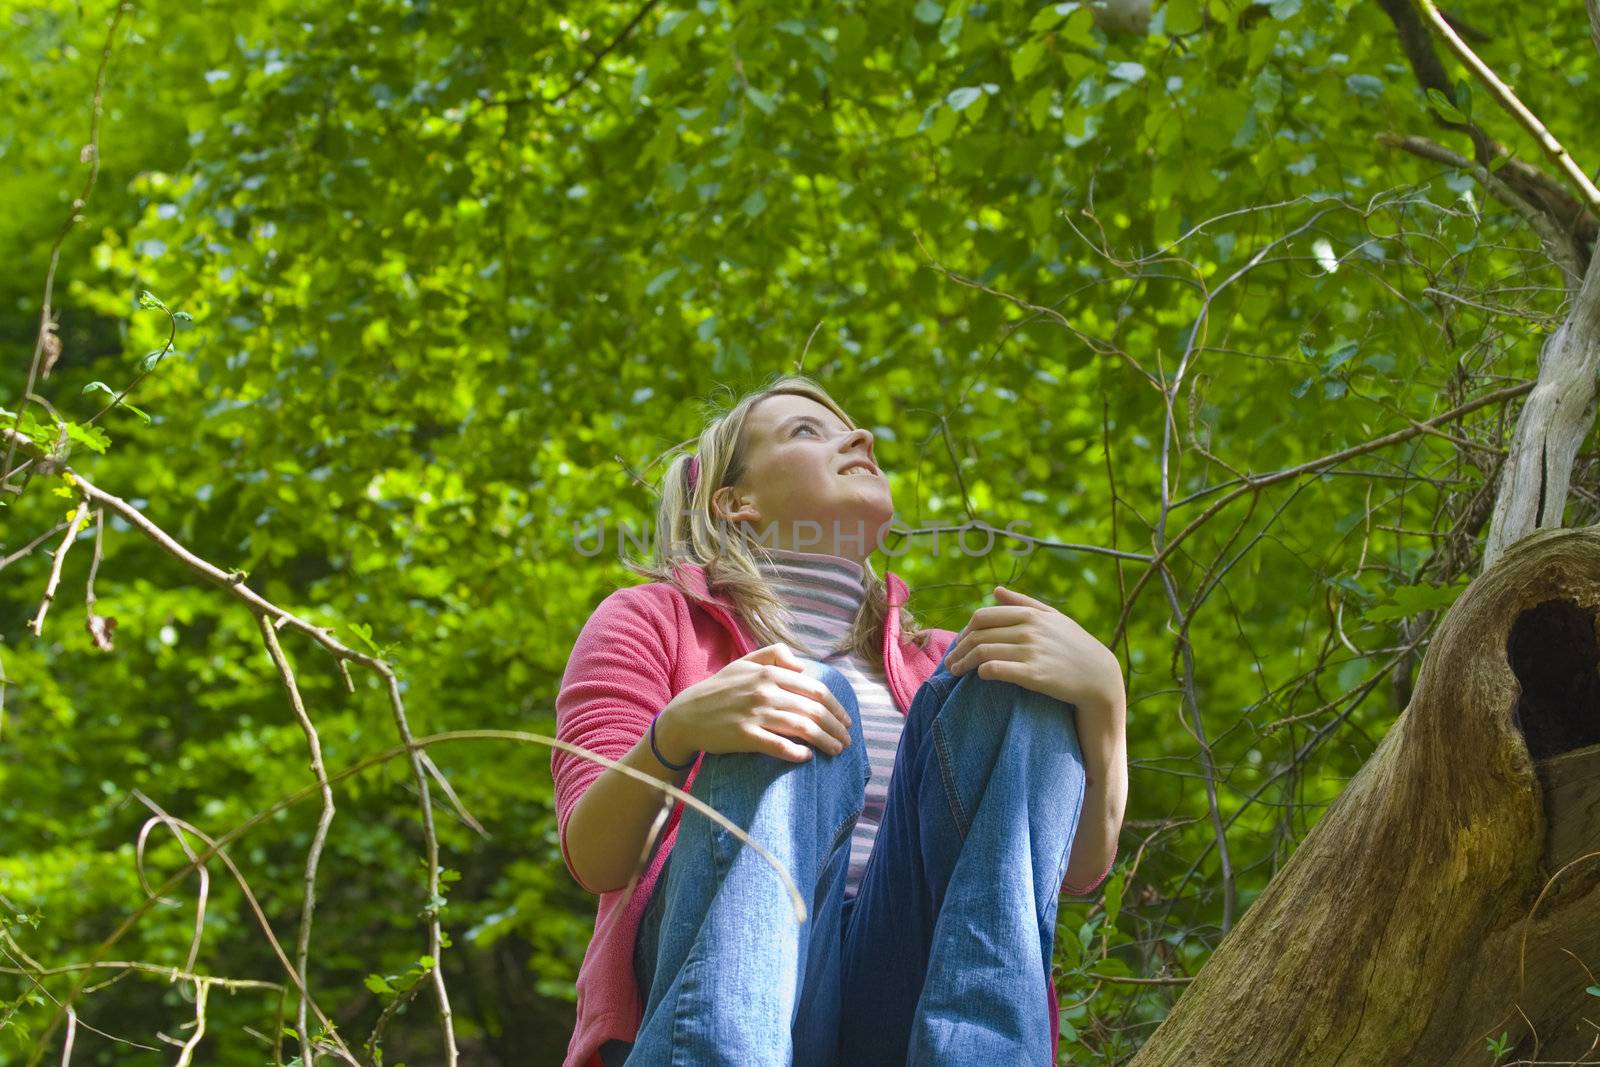 Teenager looks up into the tree in which she has climbed.